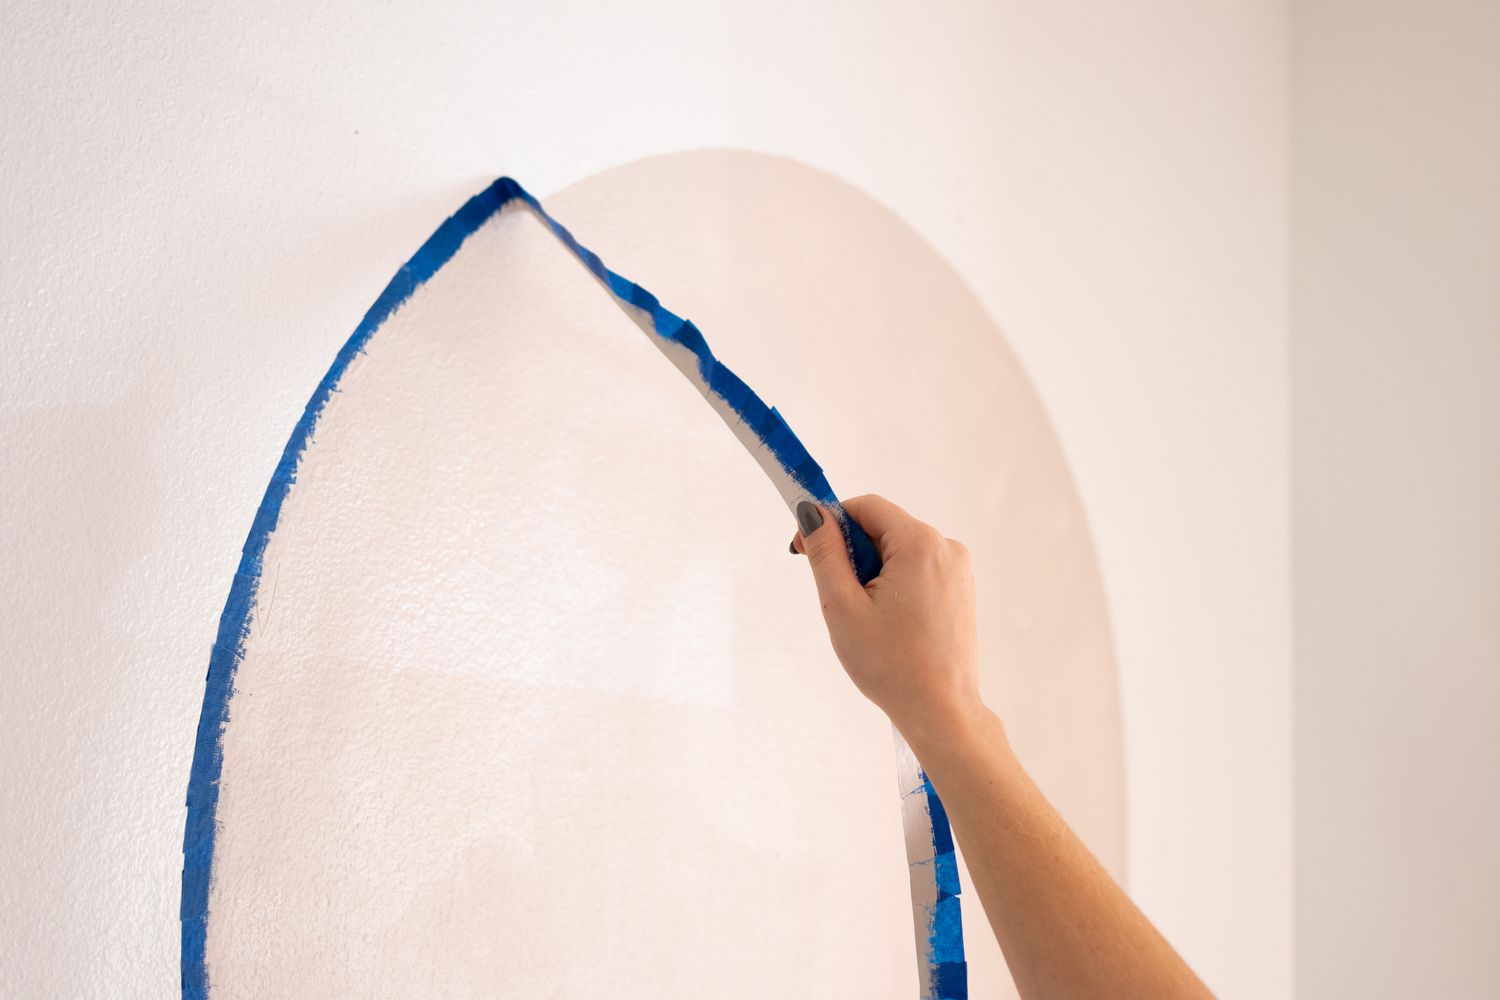 Painter's tape removed from wall to expose DIY painted arch